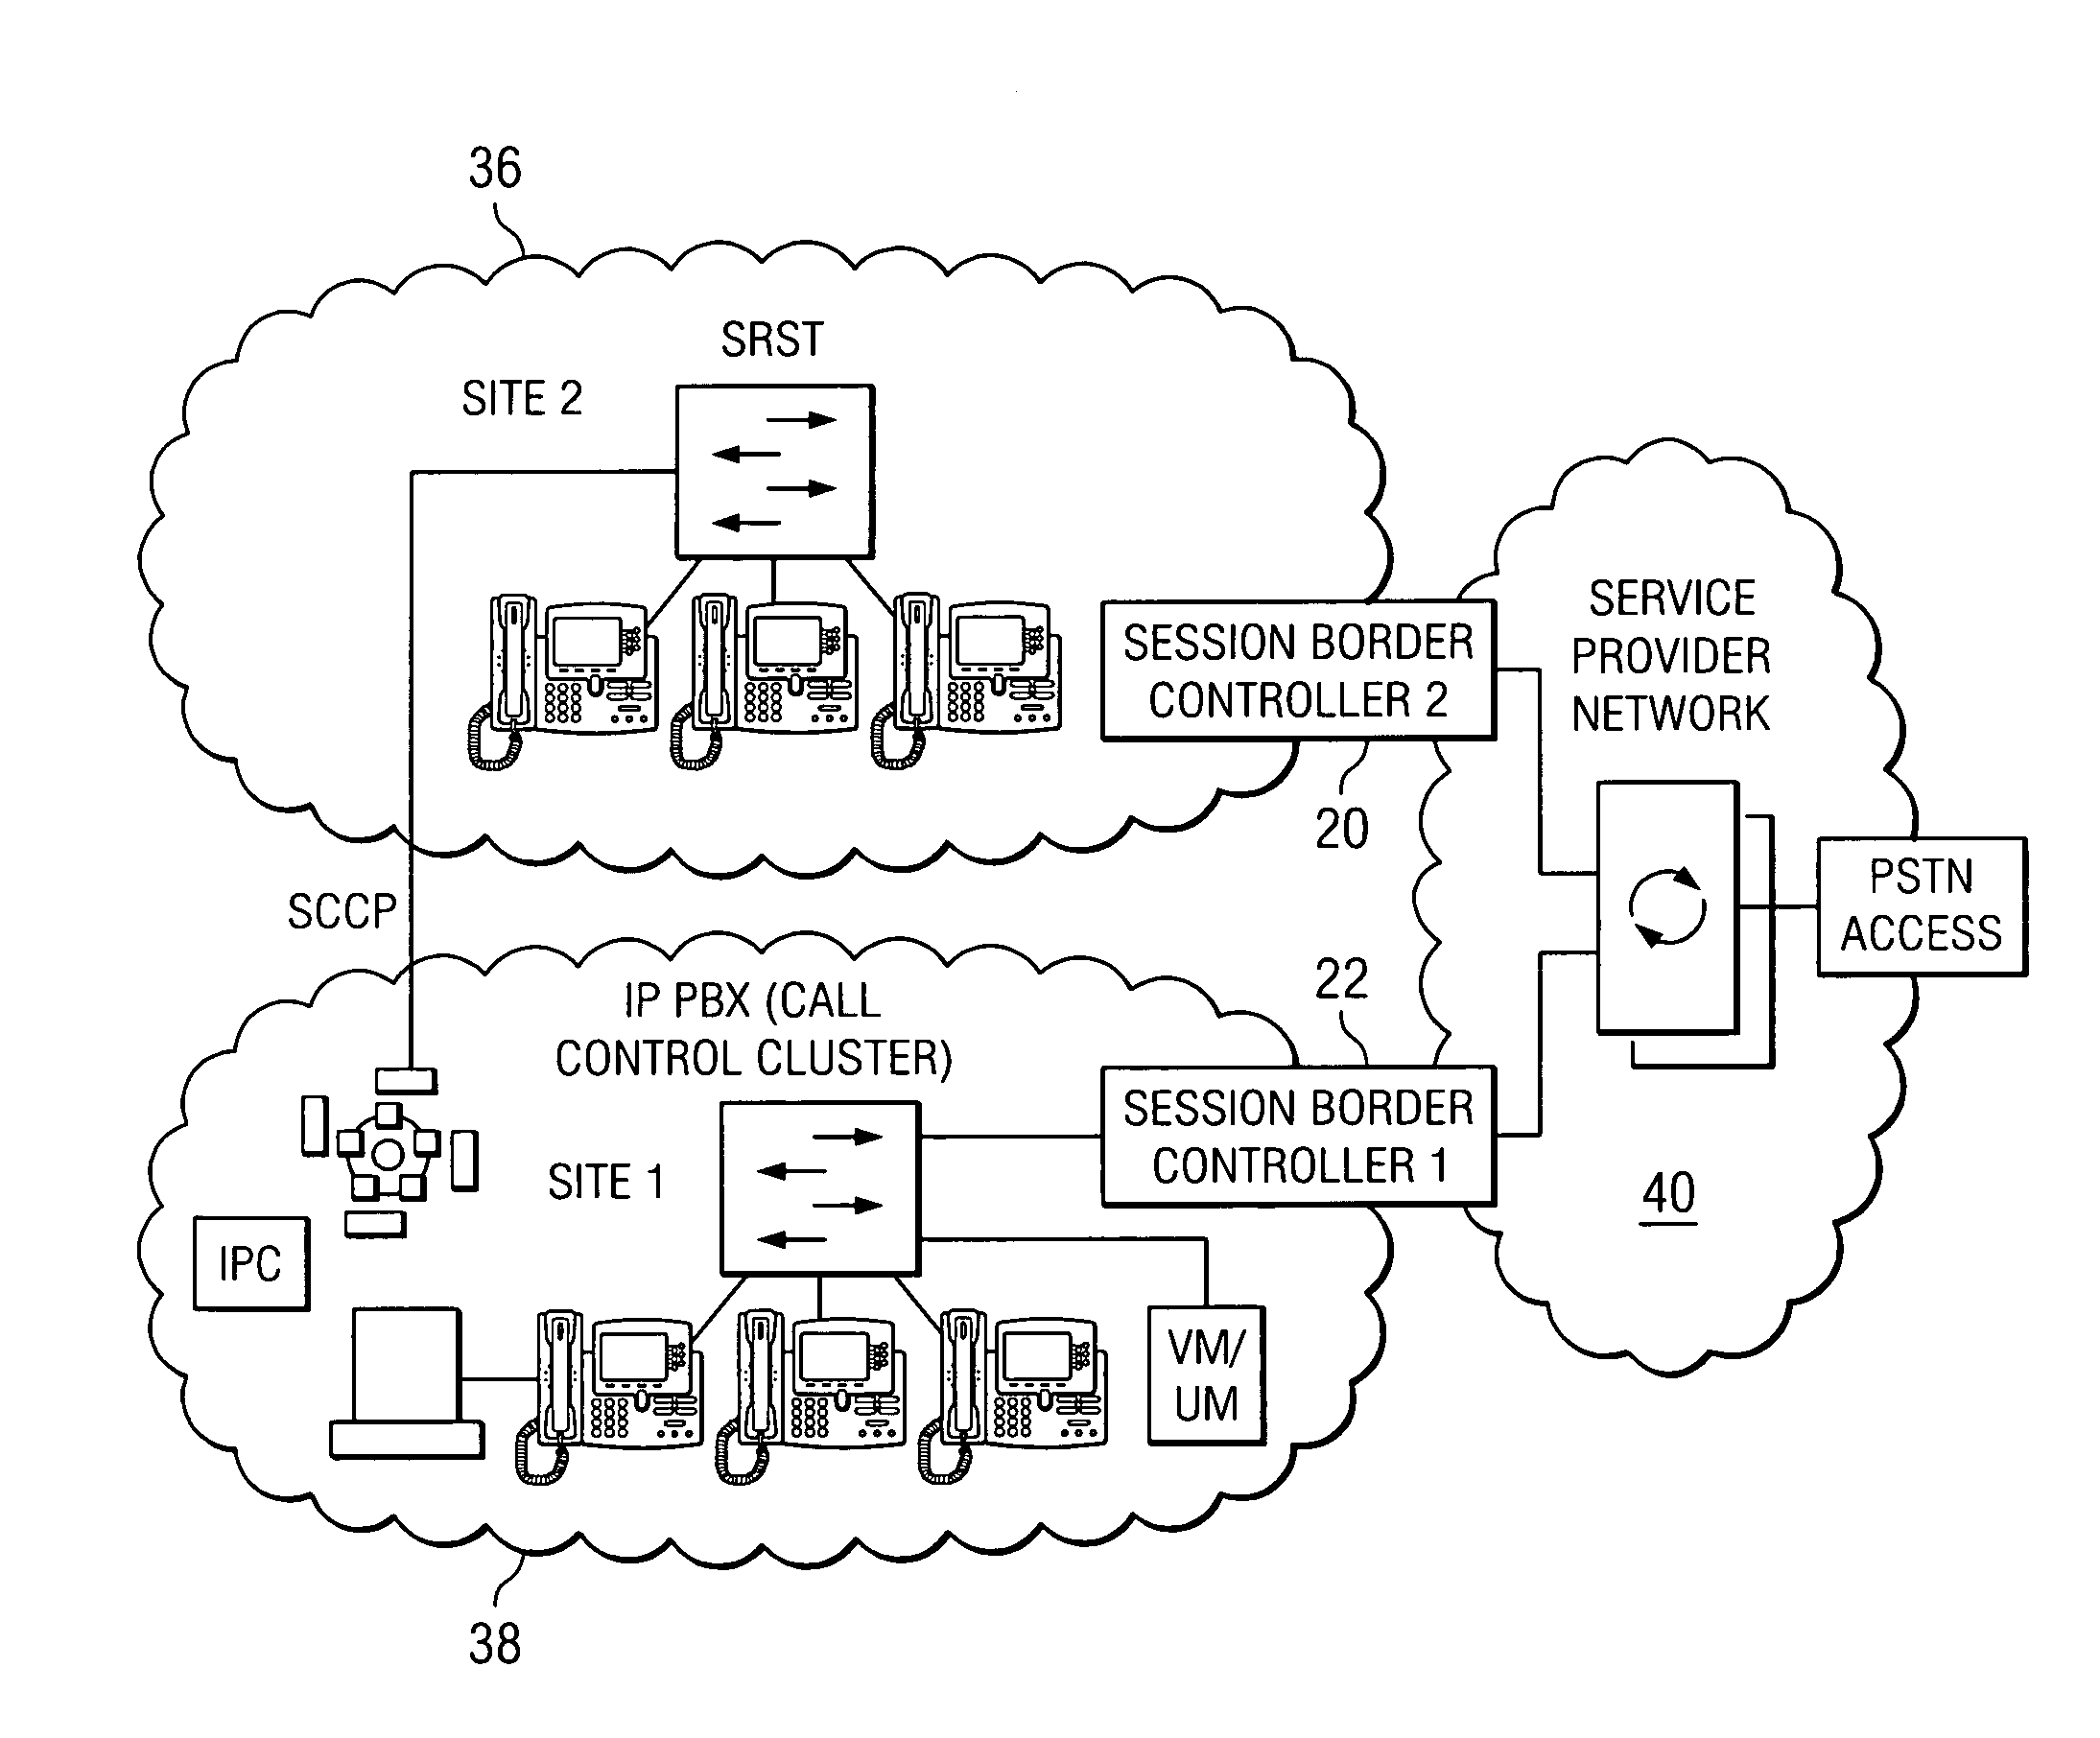 System and method for optimizing communications between session border controllers and endpoints in a network environment